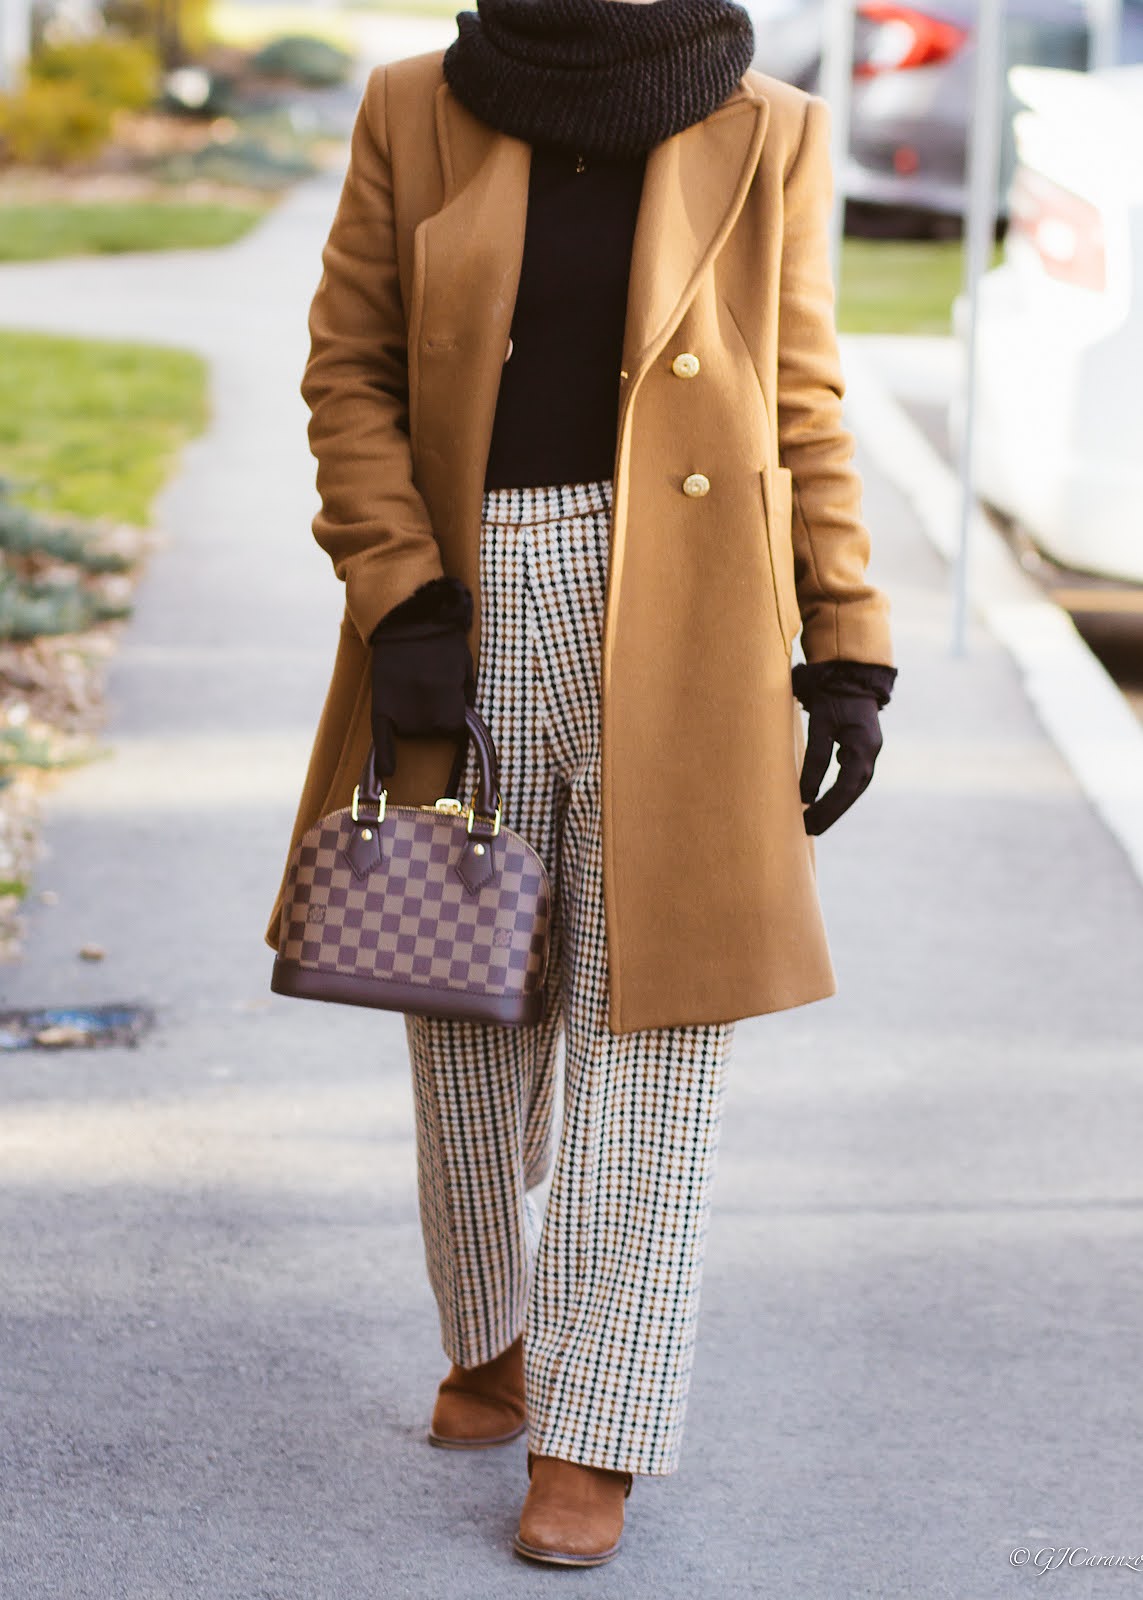 Zara Wool Blend Coat | H&M Knit Infinity Scarf | Zara Knit Pants | Steve Madden Suede Ankle Boots | Louis Vuitton Alma BB Bag | Uniqlo Turtleneck Top | Gucci Sunglasses | Petite Style | Fall Fashion